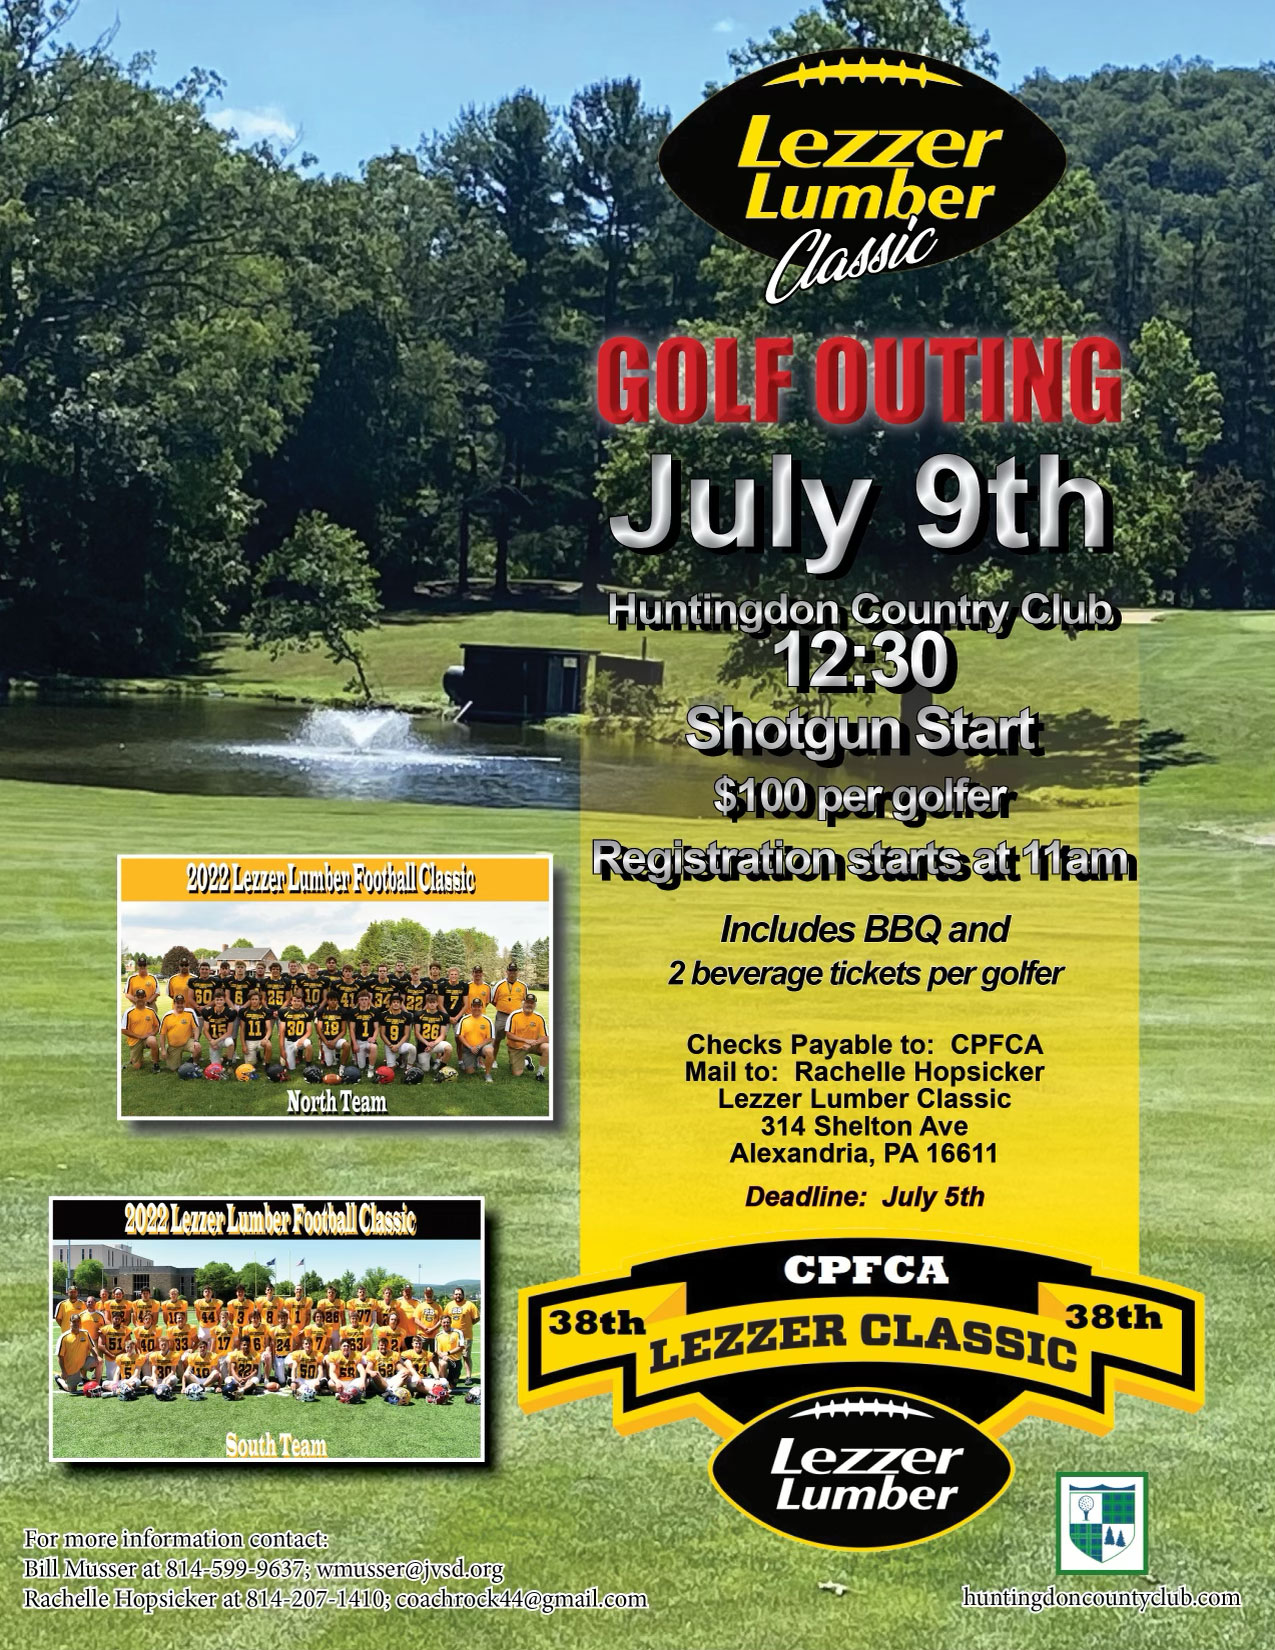 2023 Lezzer Lumber Classic Golf Outing: July 9th at Huntingdon County Club